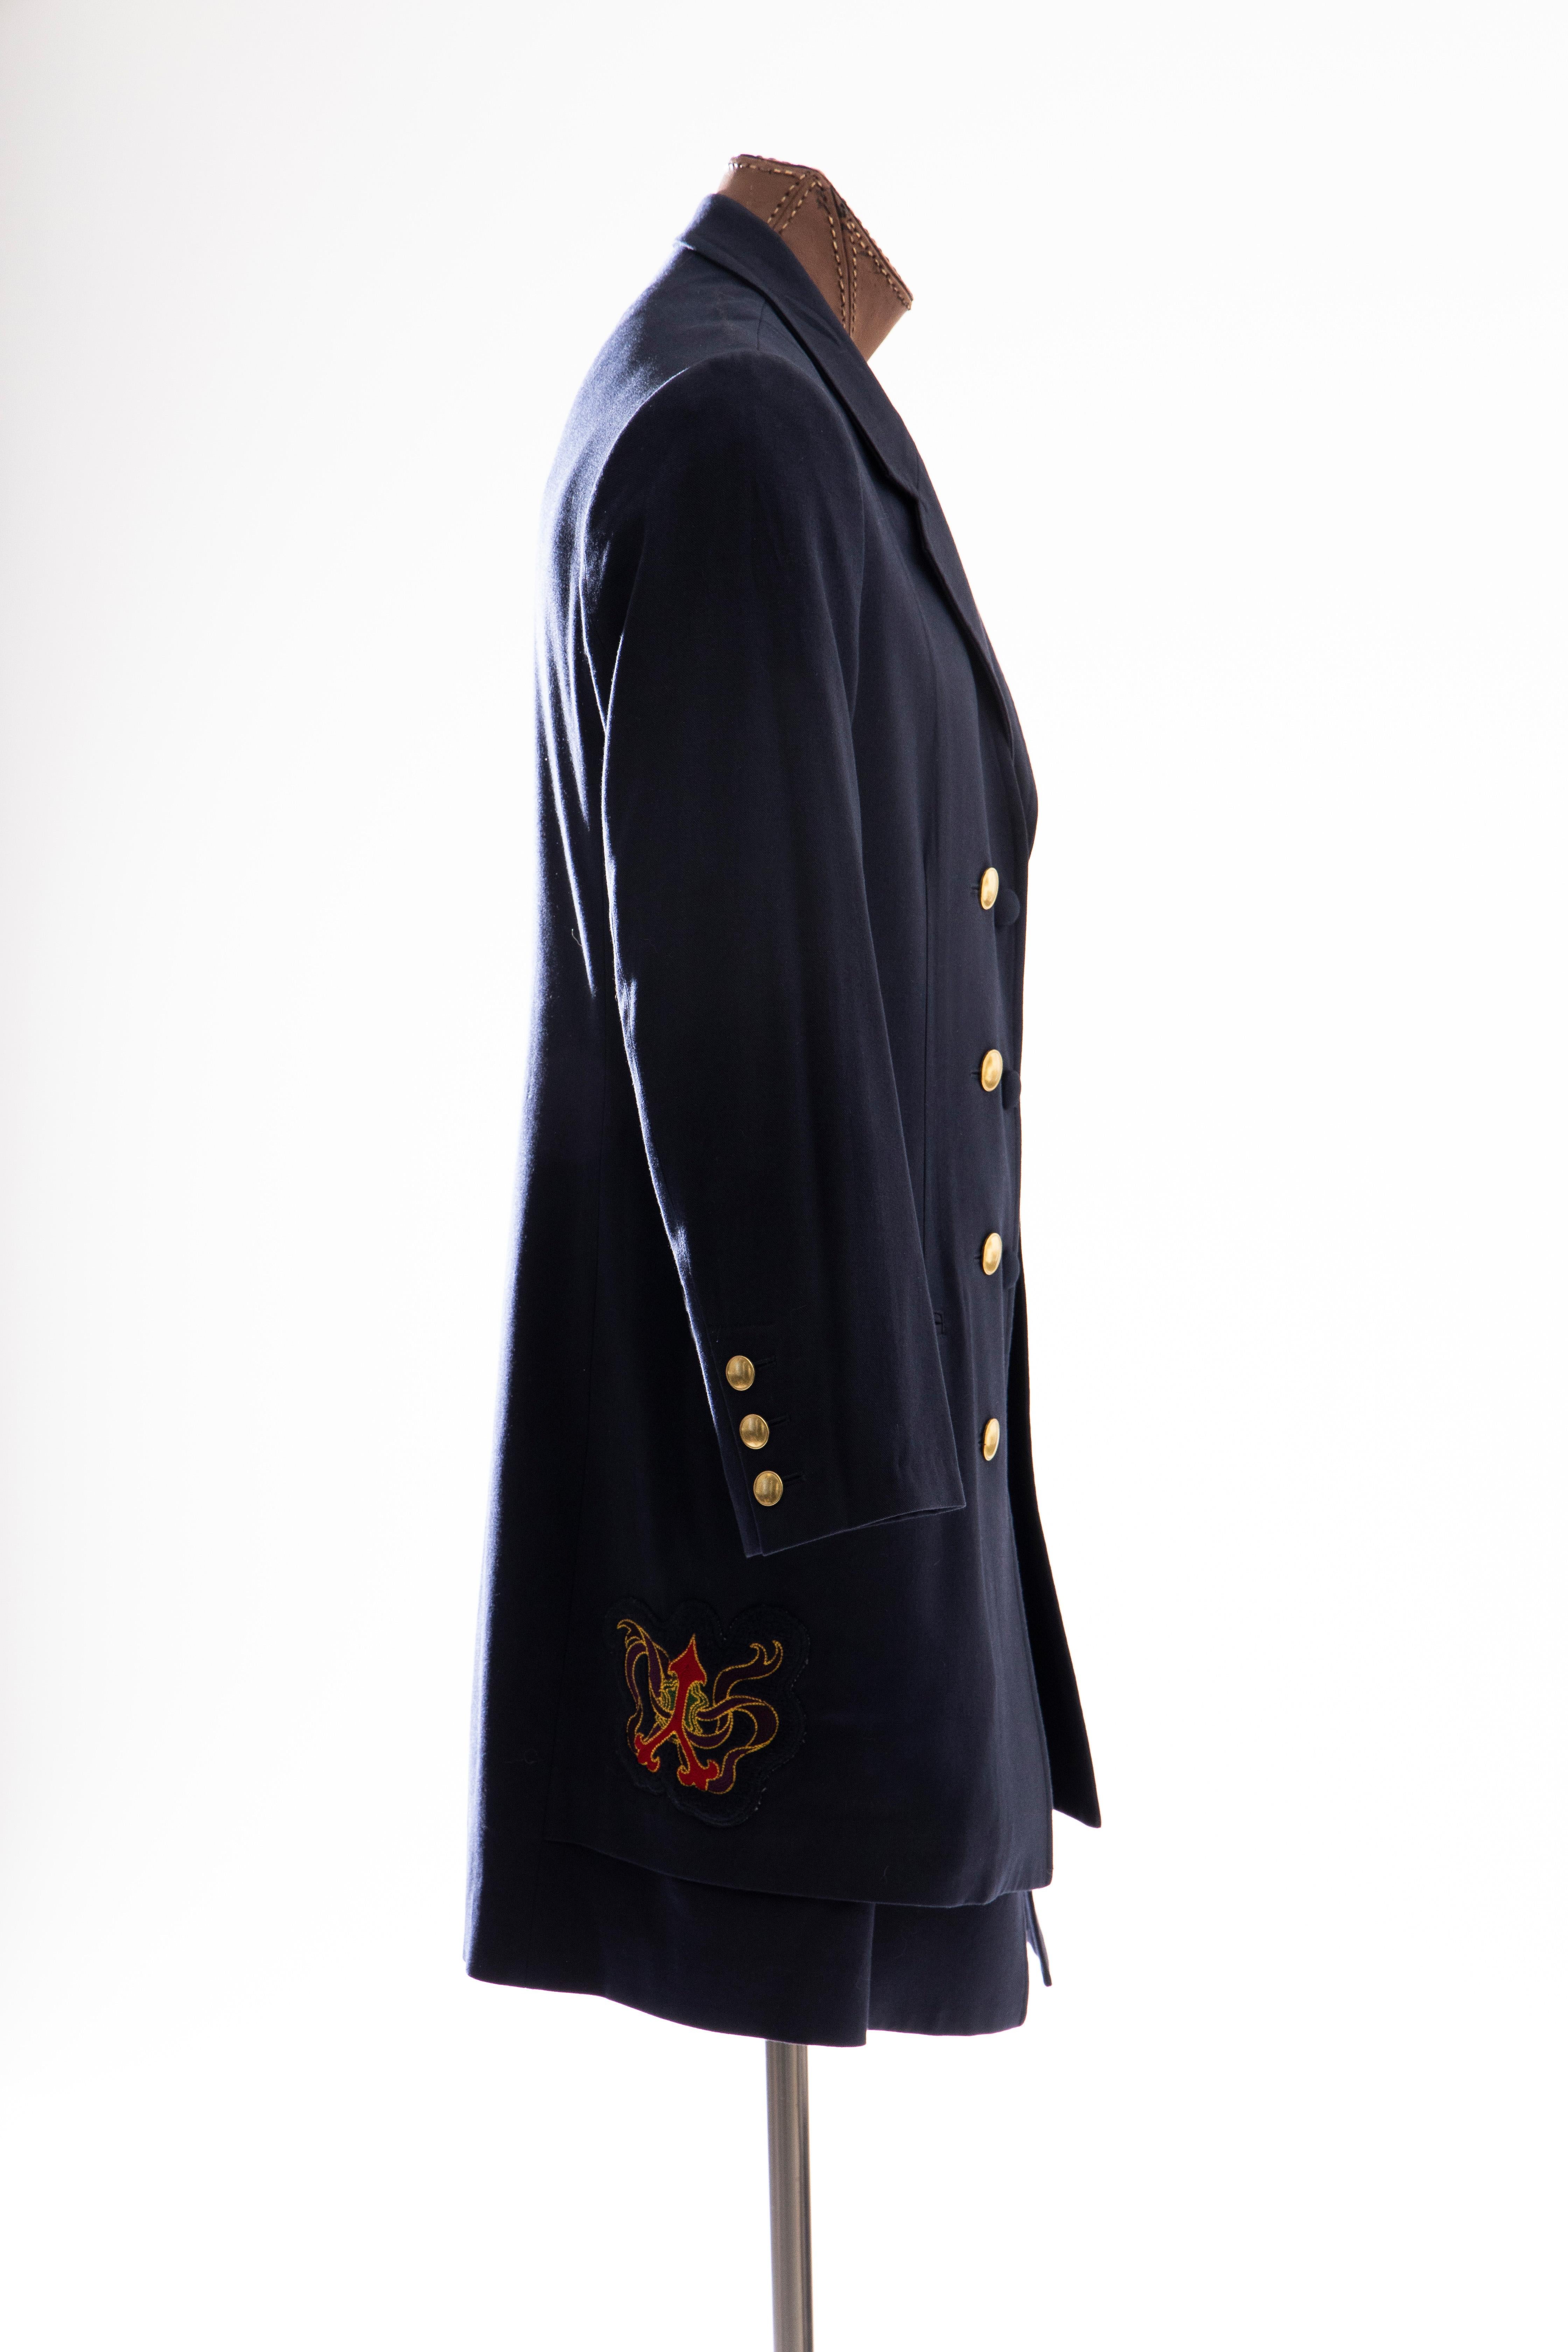 Black Yohji Yamamoto Pour Homme Cotton Wool Navy Coat Embroidered Patches, Fall 2012 For Sale